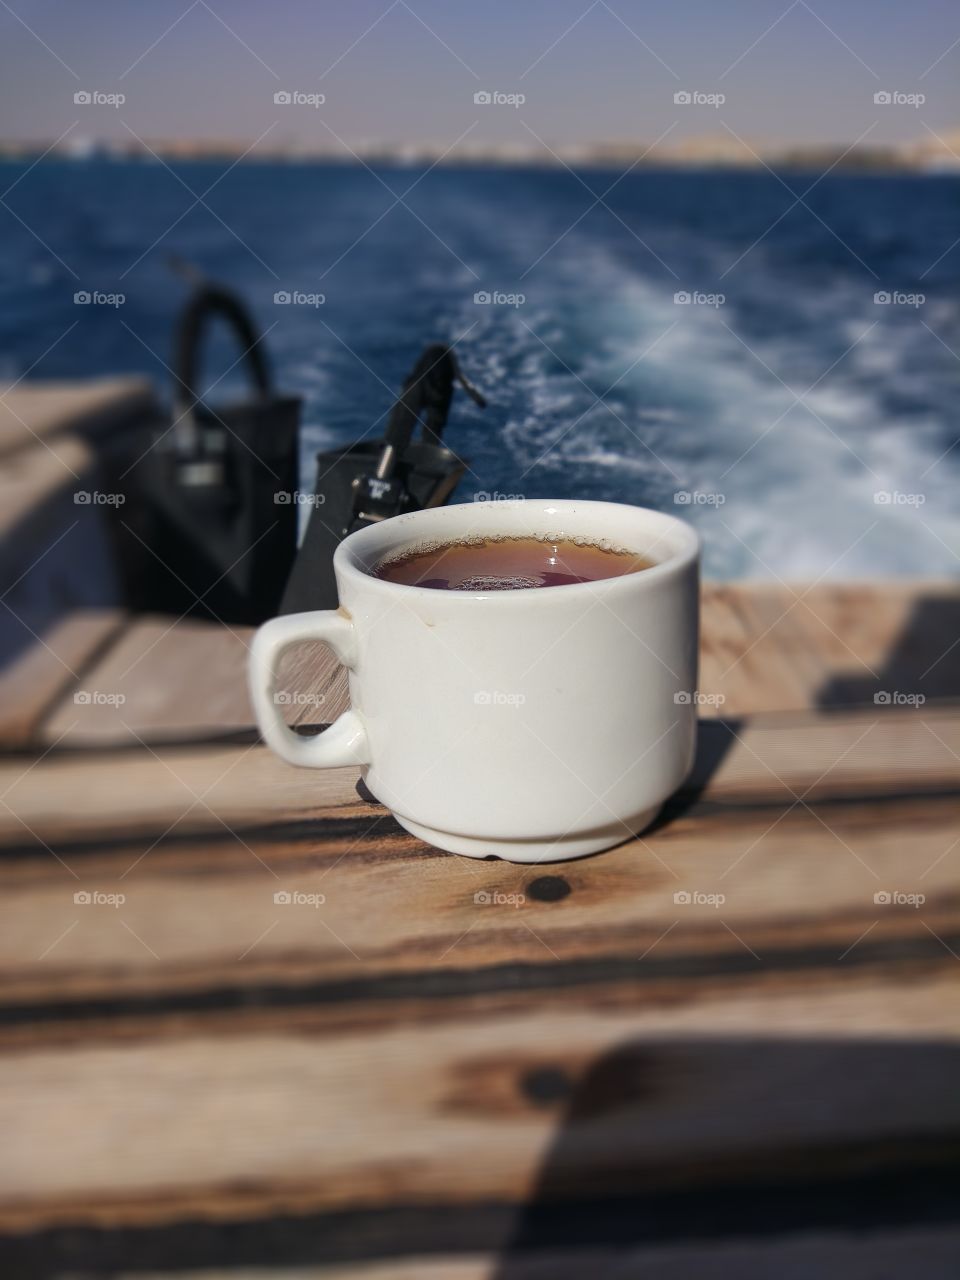 A cup of tea before diving